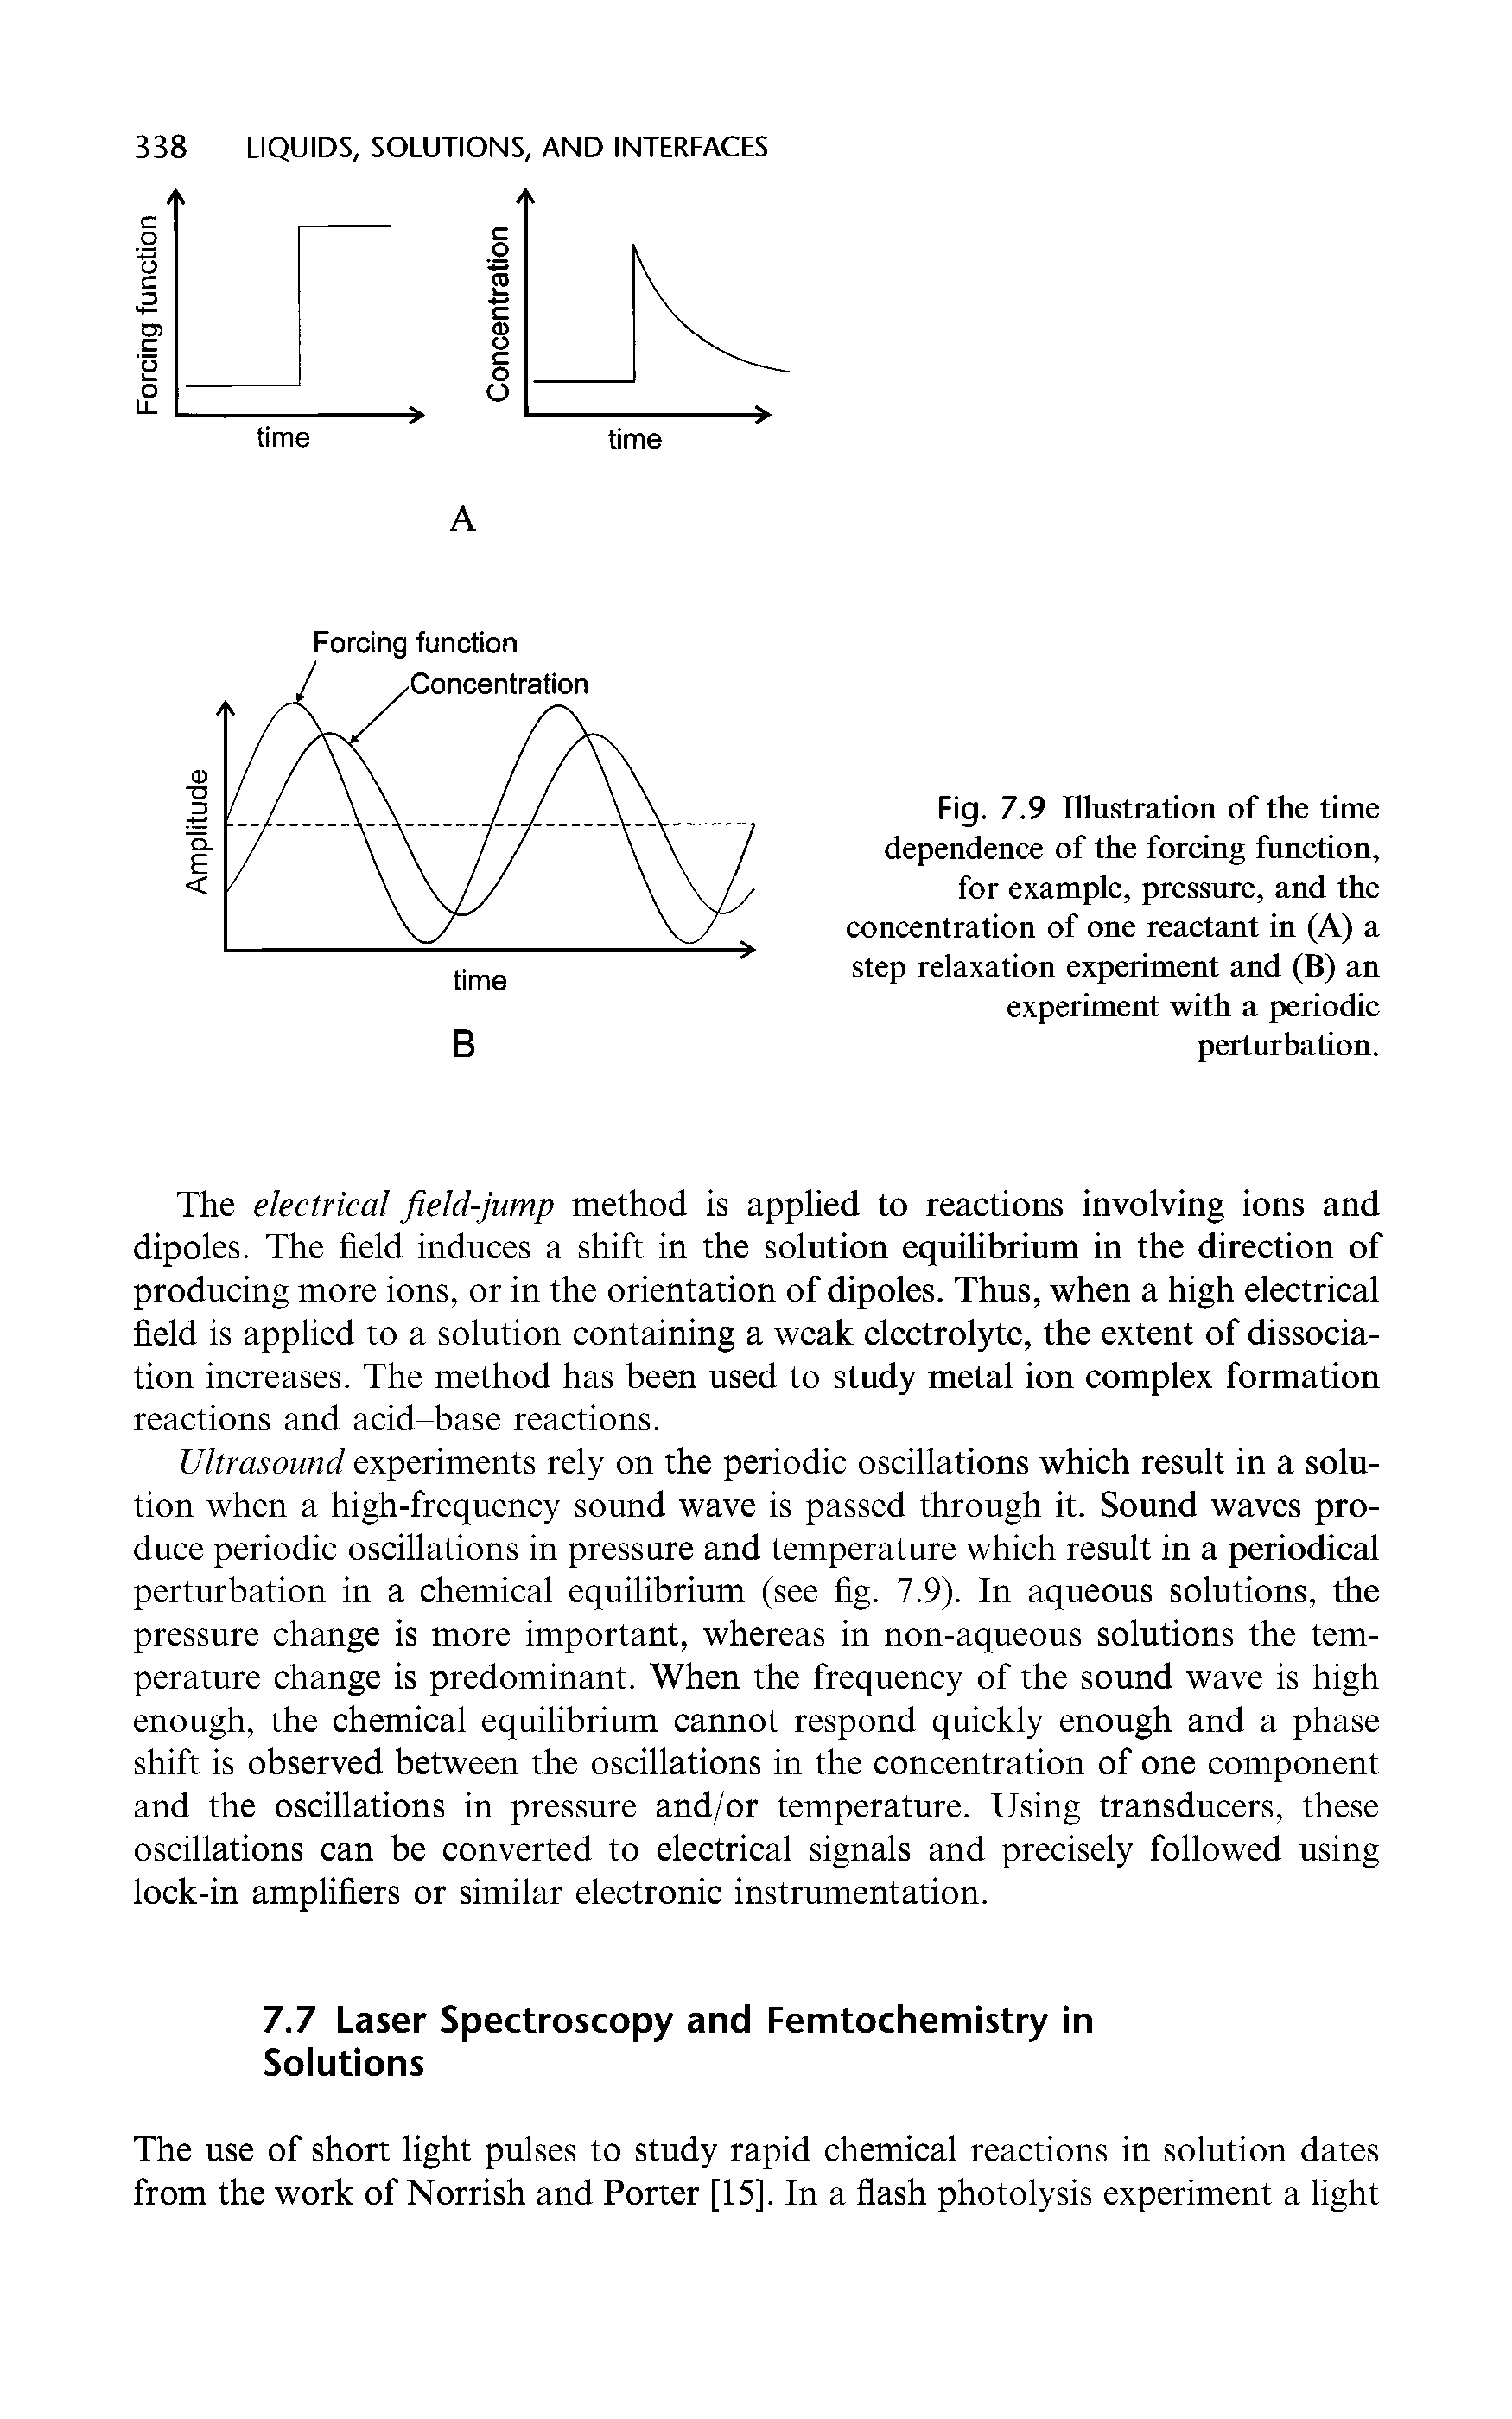 Fig. 7.9 Illustration of the time dependence of the forcing function, for example, pressure, and the concentration of one reactant in (A) a step relaxation experiment and (B) an experiment with a periodic perturbation.